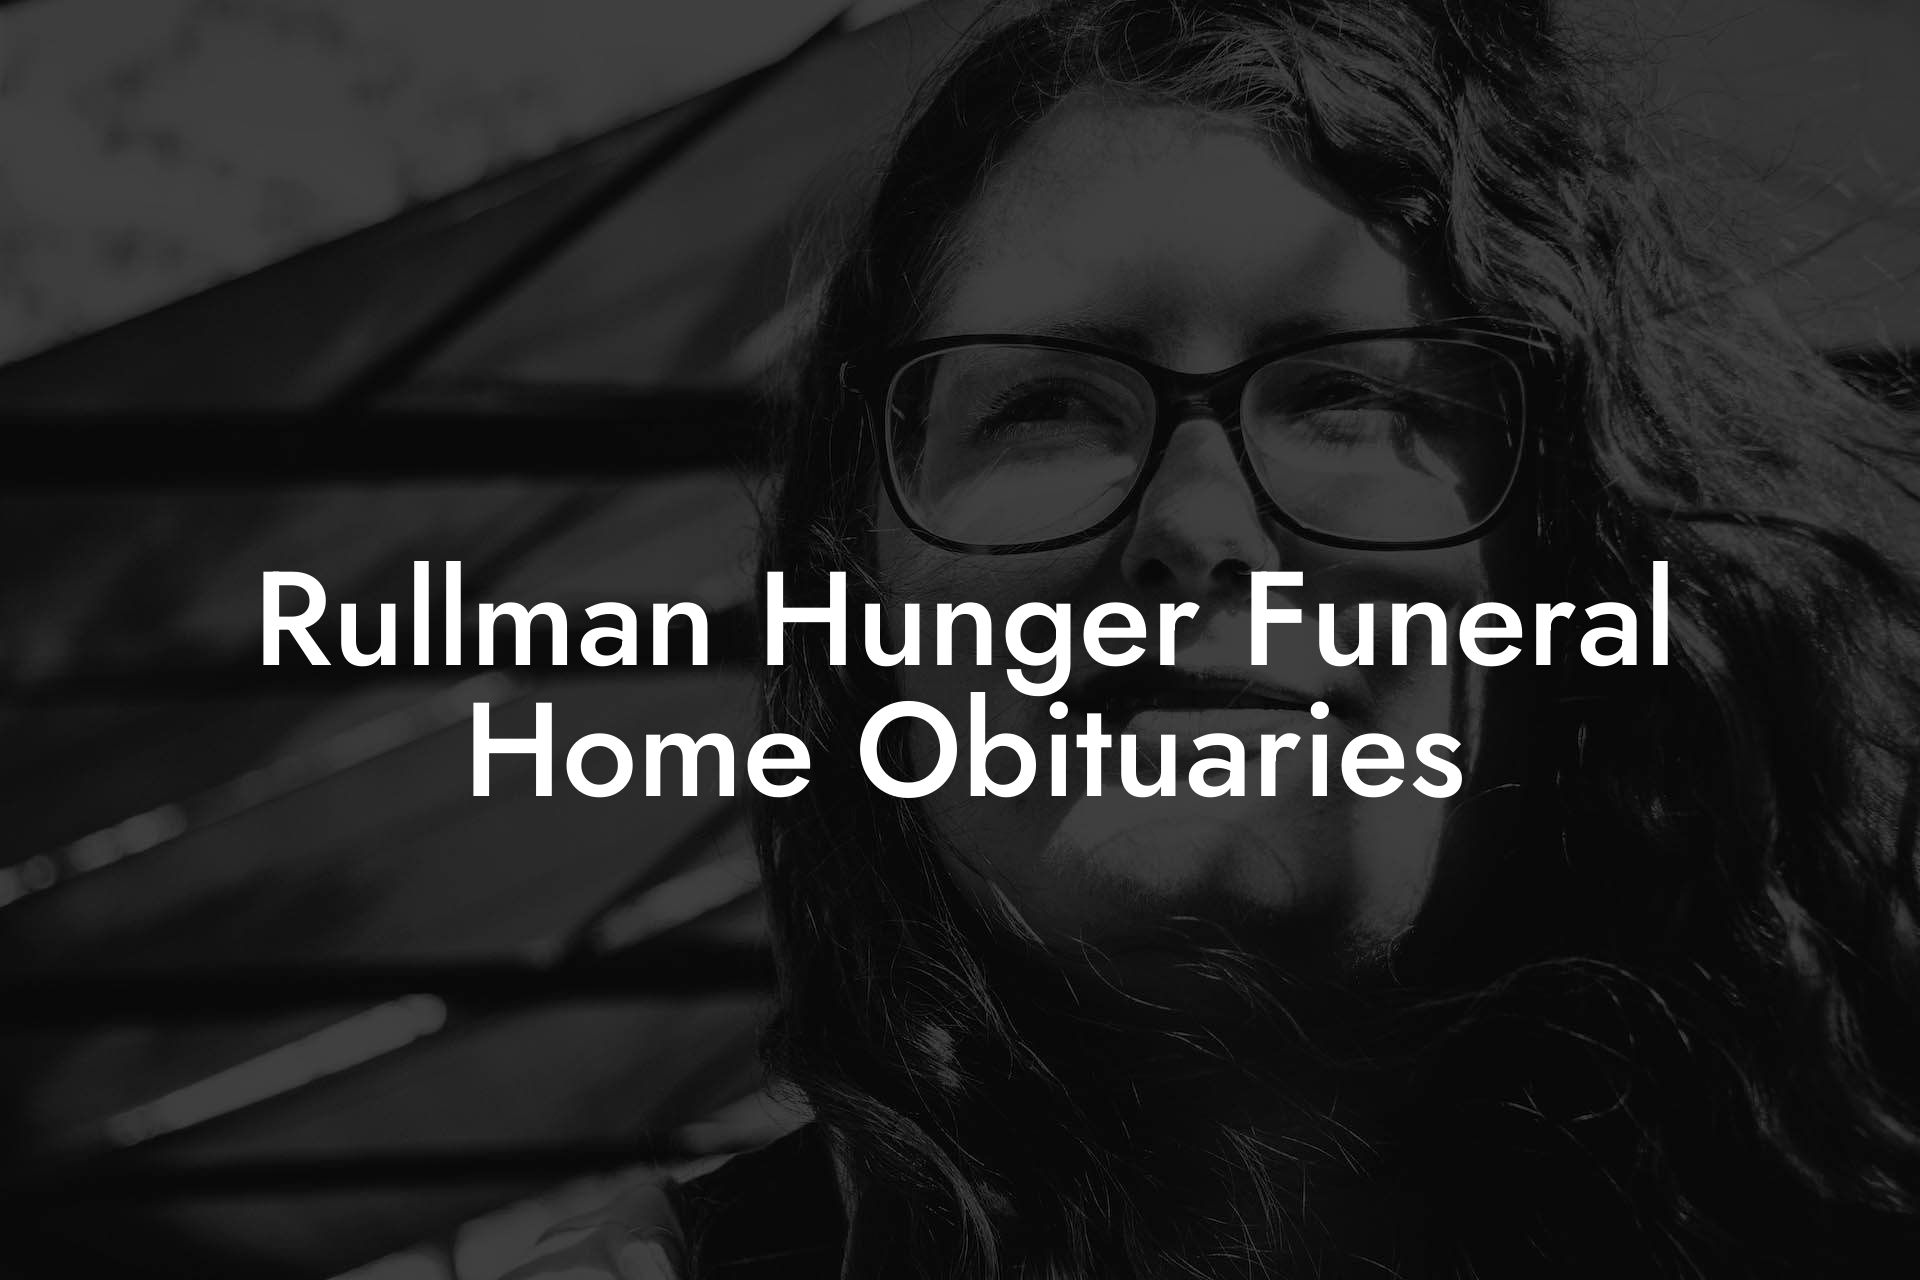 Rullman Hunger Funeral Home Obituaries